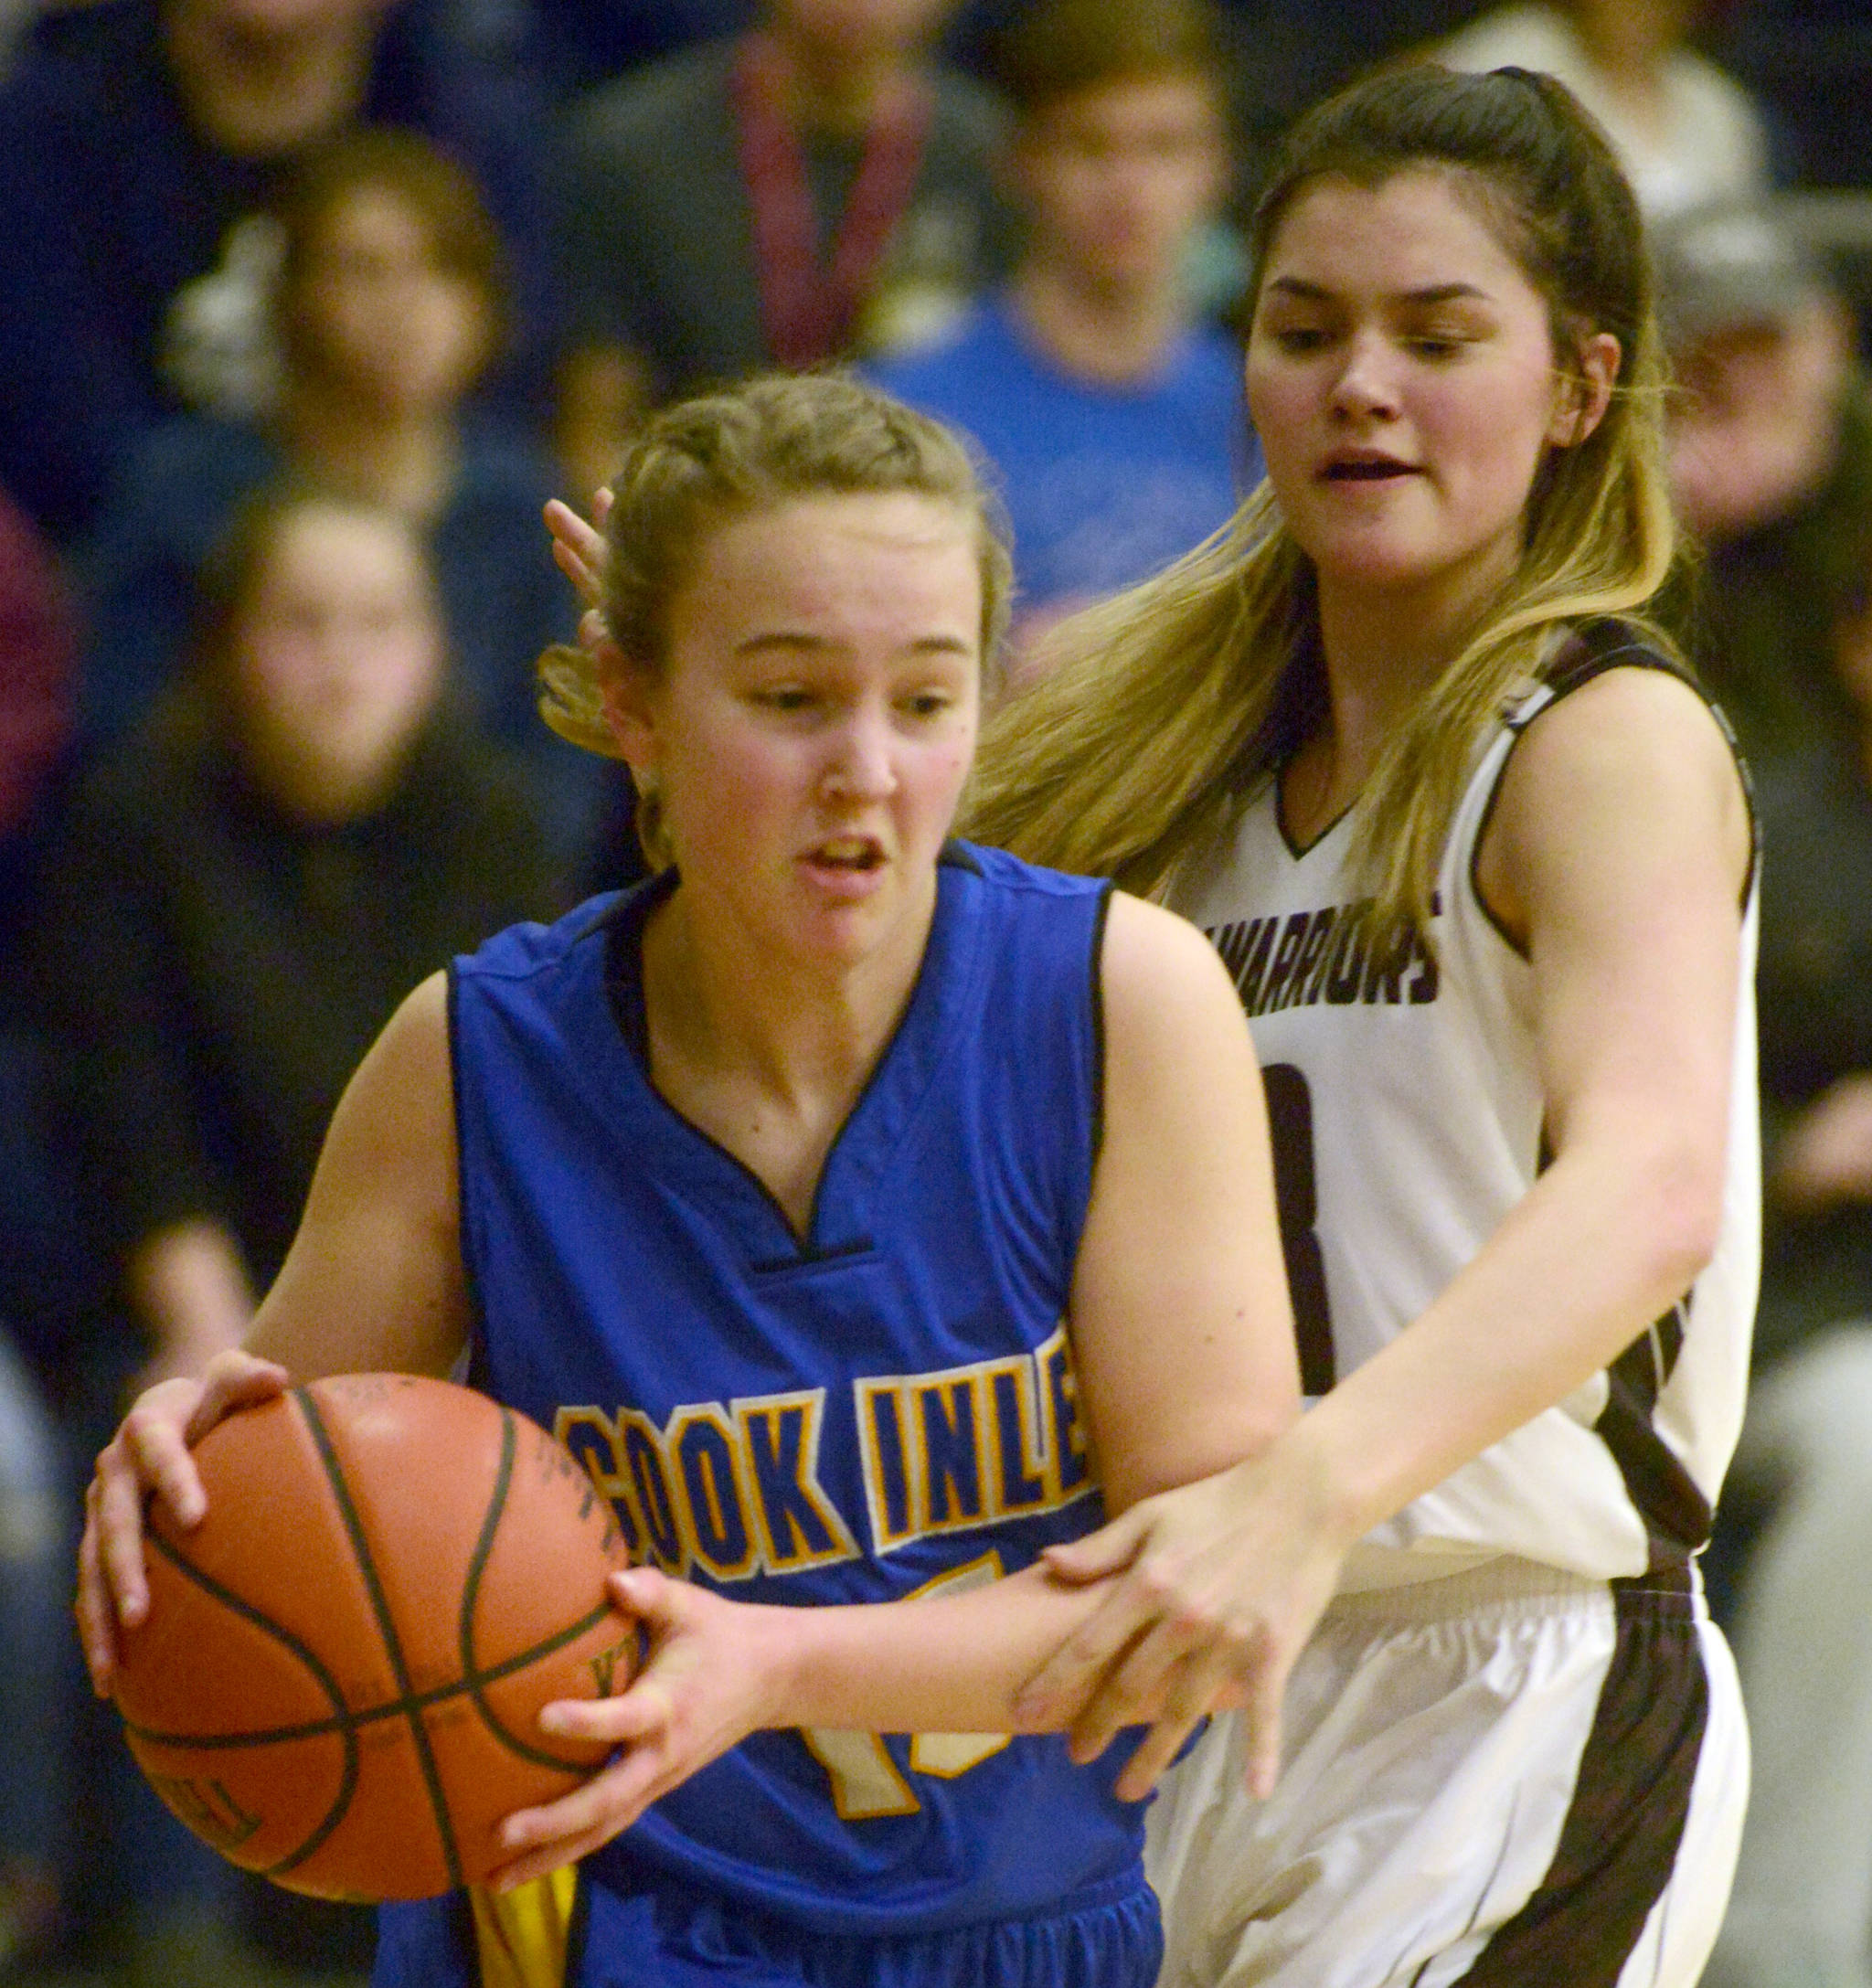 Cook Inlet Academy’s Addie Nelson drives on Nikolaevsk’s Justina Fefelov on Friday, March 1, 2019, in the Peninsula Conference finals at Cook Inlet Academy. (Photo by Jeff Helminiak/Peninsula Clarion)